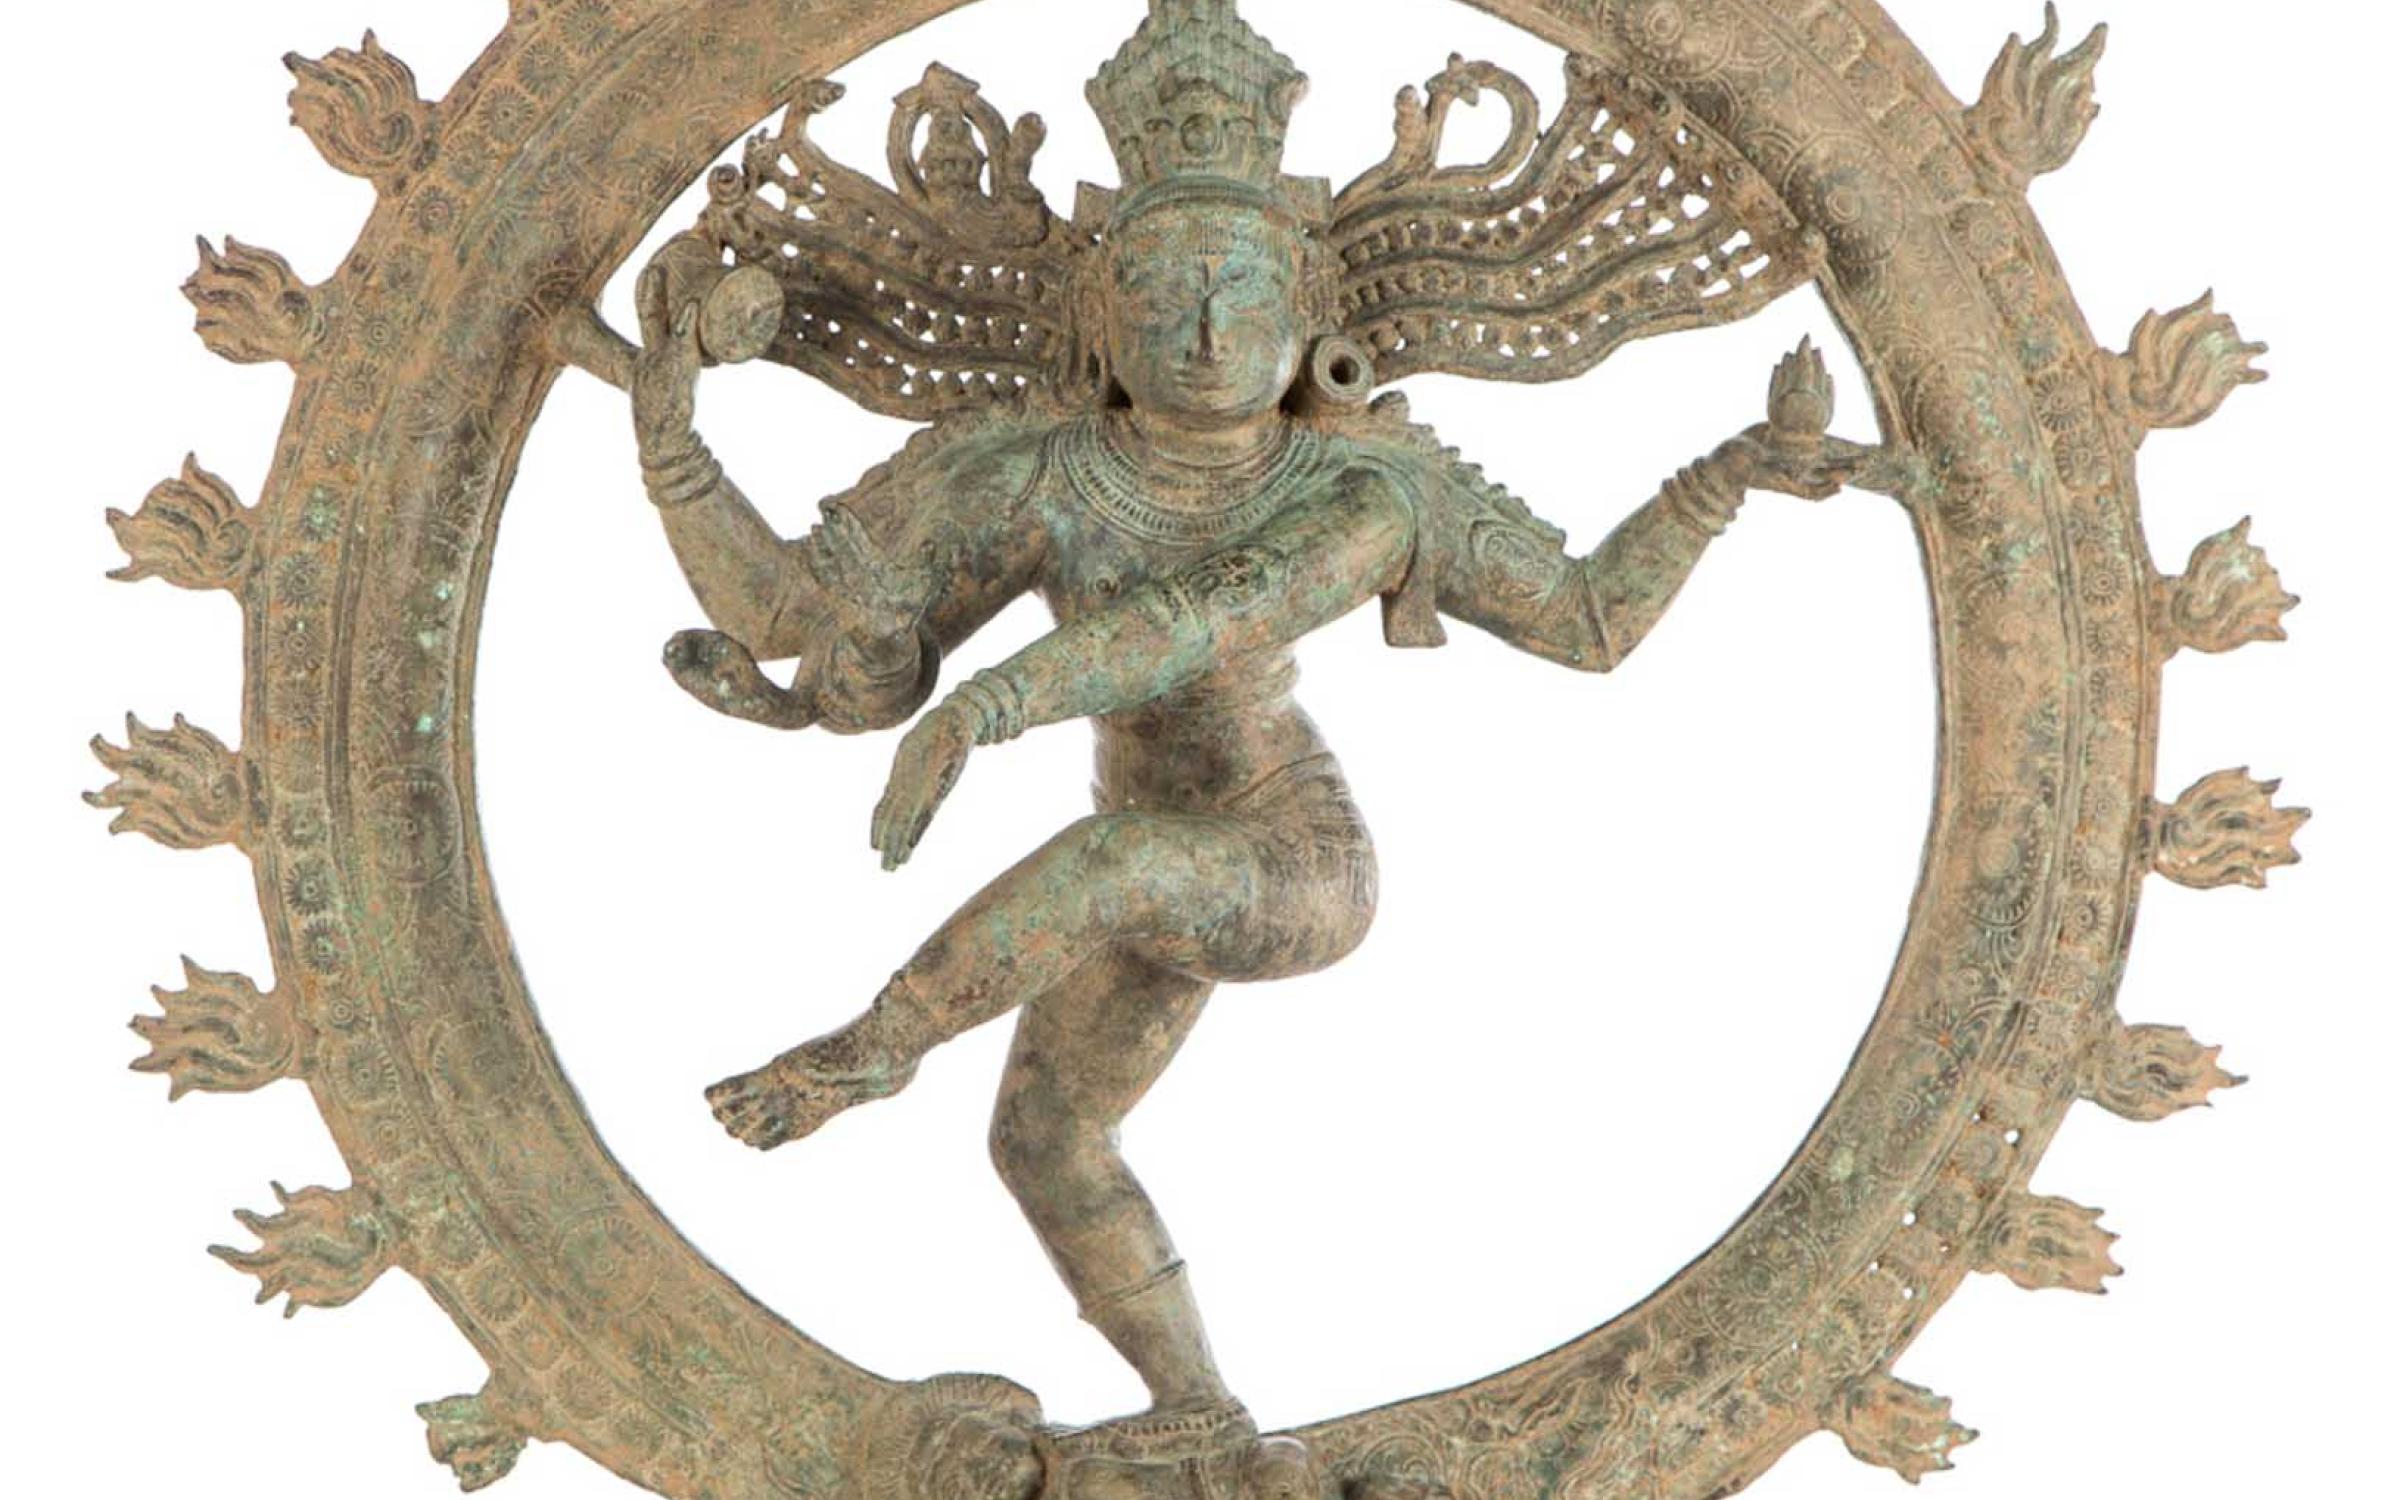 Shiva as Lord of Dance (Nataraja), Southern India, Chola dynasty, ca. 12th-13th century, bronze, gift of the Christensen Fund to commemorate founding Director E. Frank Sanguinetti's 84th birthday, UMFA2001.11.1. 